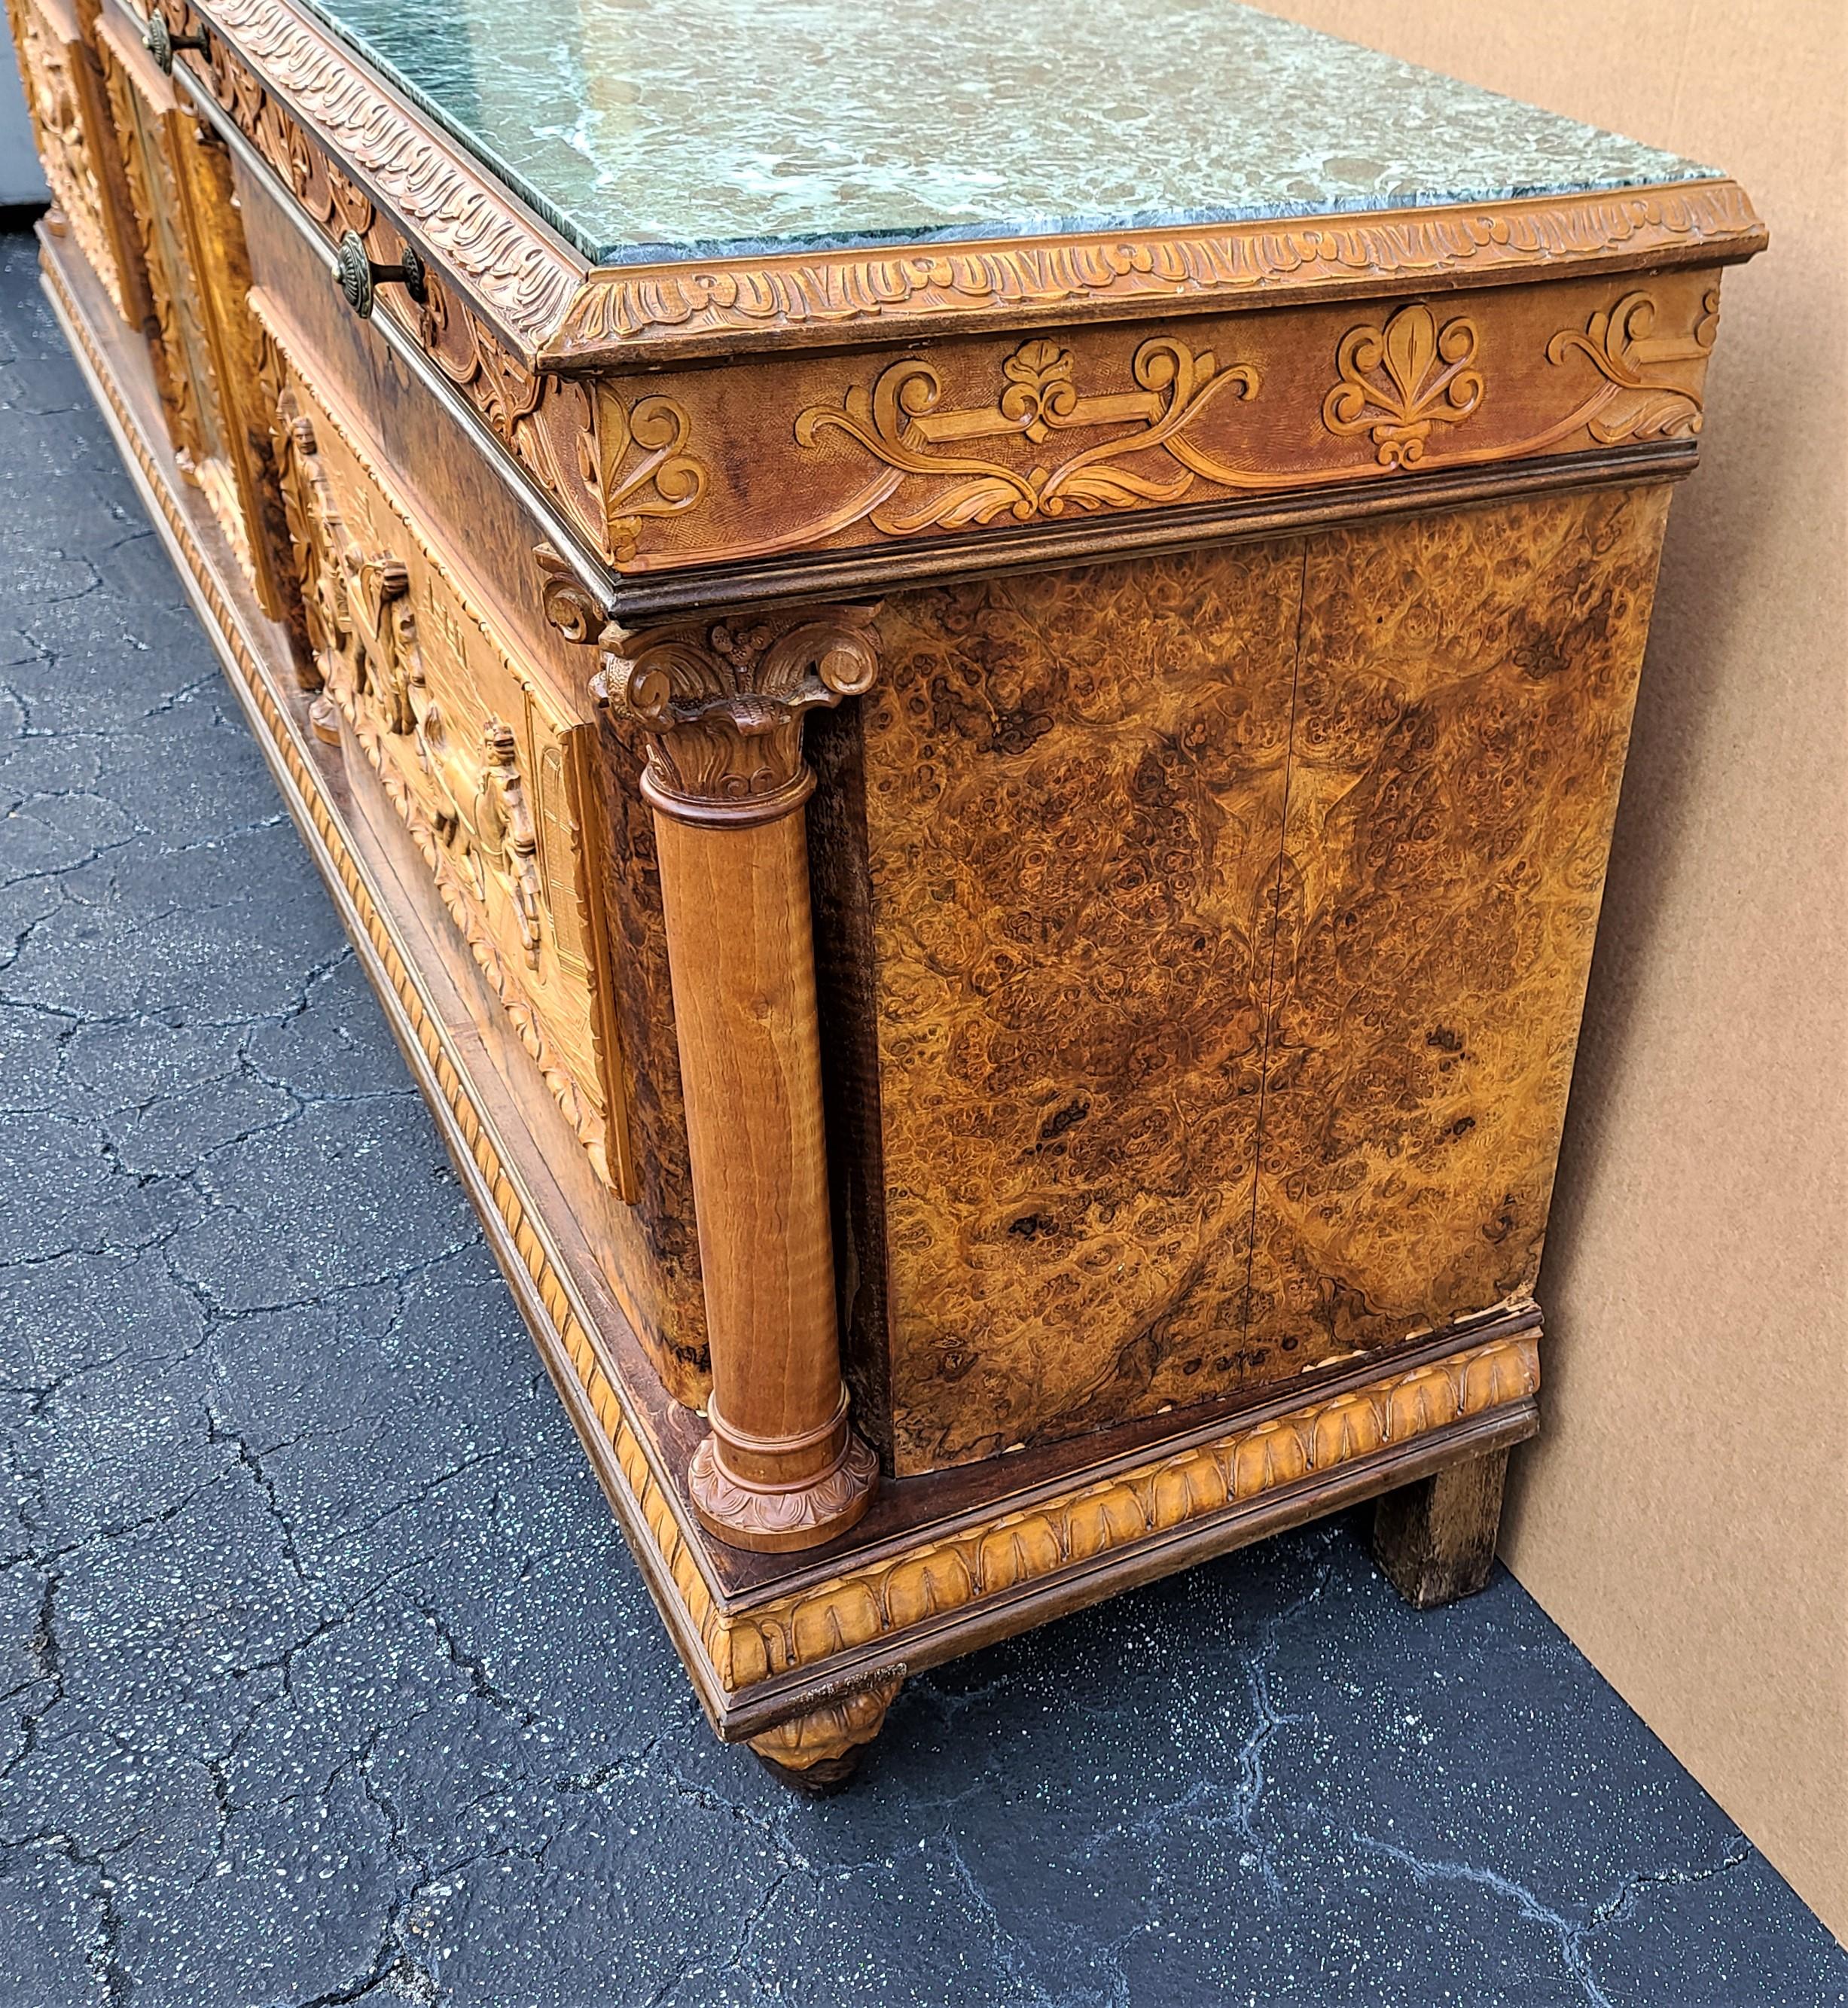 Stone Antique c 1900 Hand Carved Neoclassical Italian Credenza Bar Cabinet For Sale